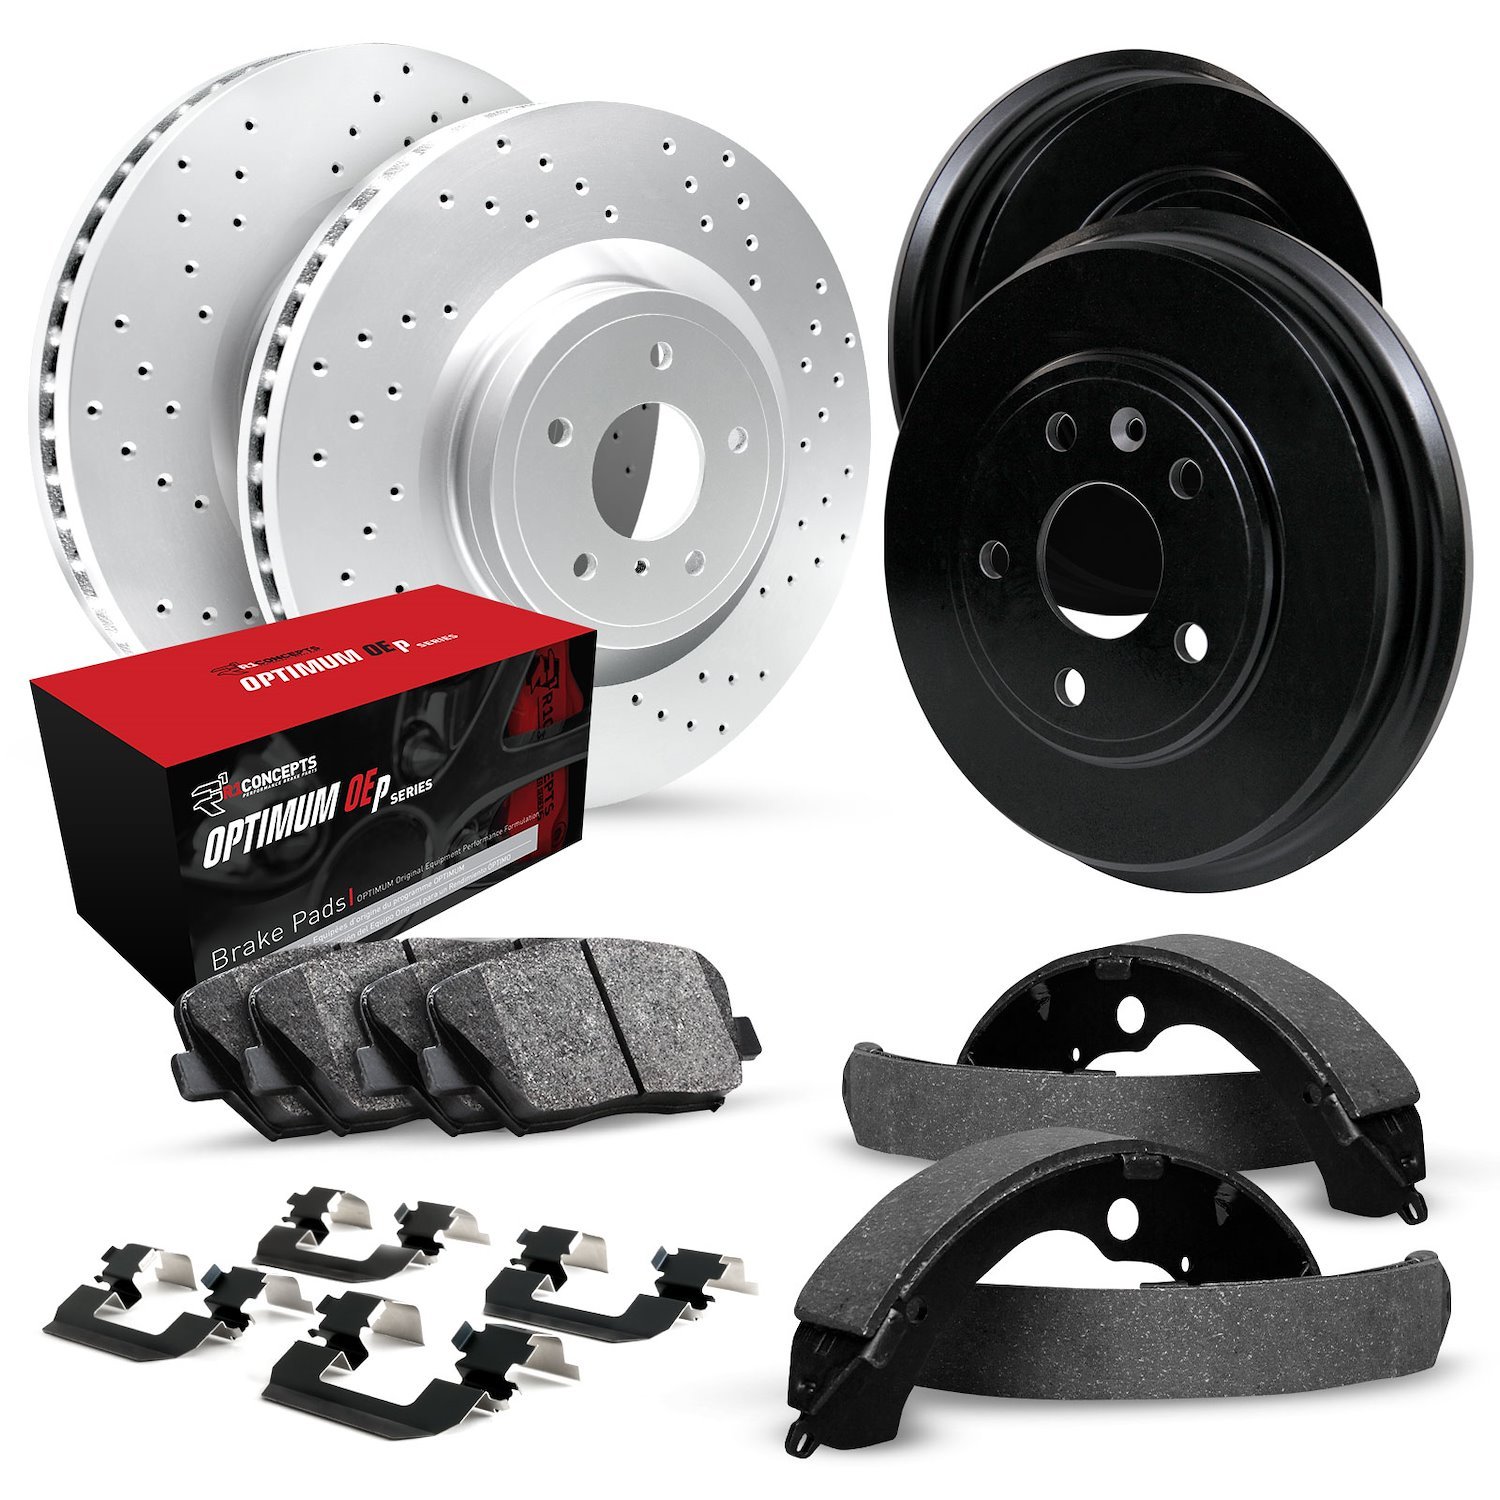 GEO-Carbon Drilled Brake Rotor & Drum Set w/Optimum OE Pads, Shoes, & Hardware, 1988-2000 GM, Position: Front & Rear